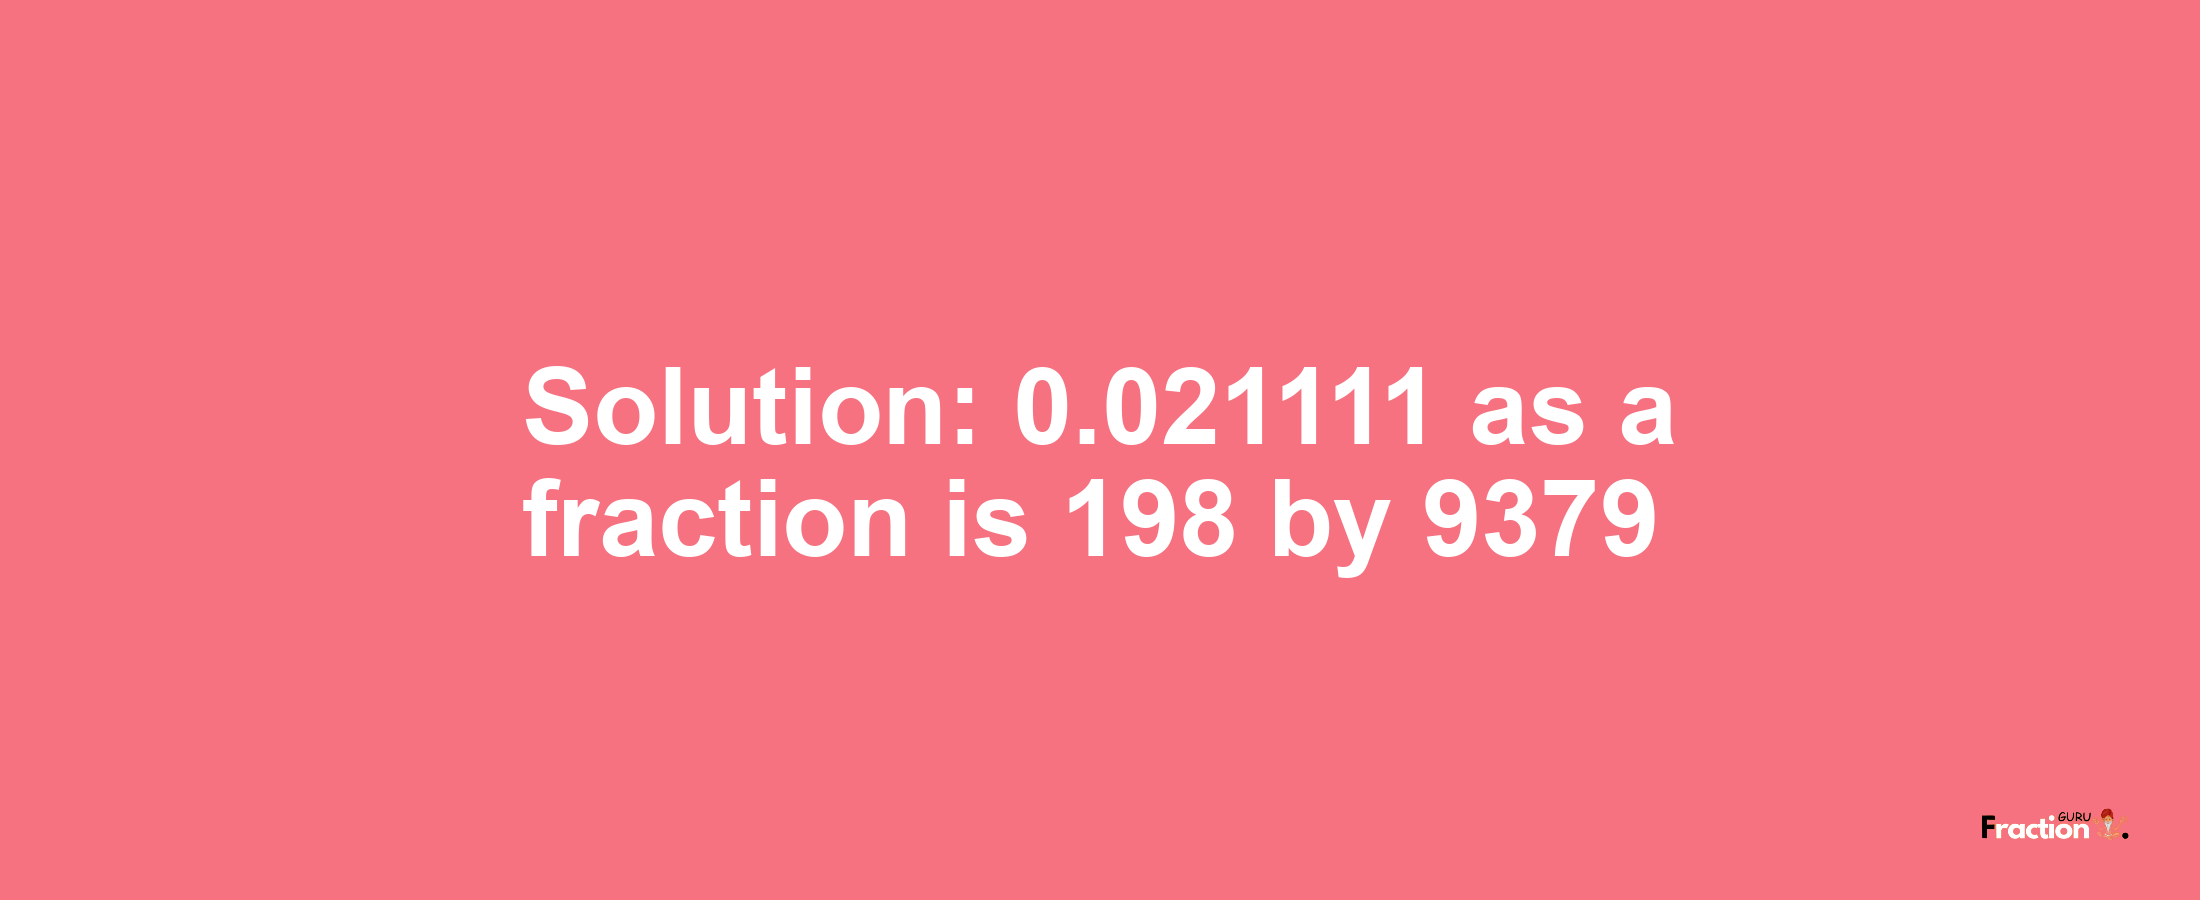 Solution:0.021111 as a fraction is 198/9379